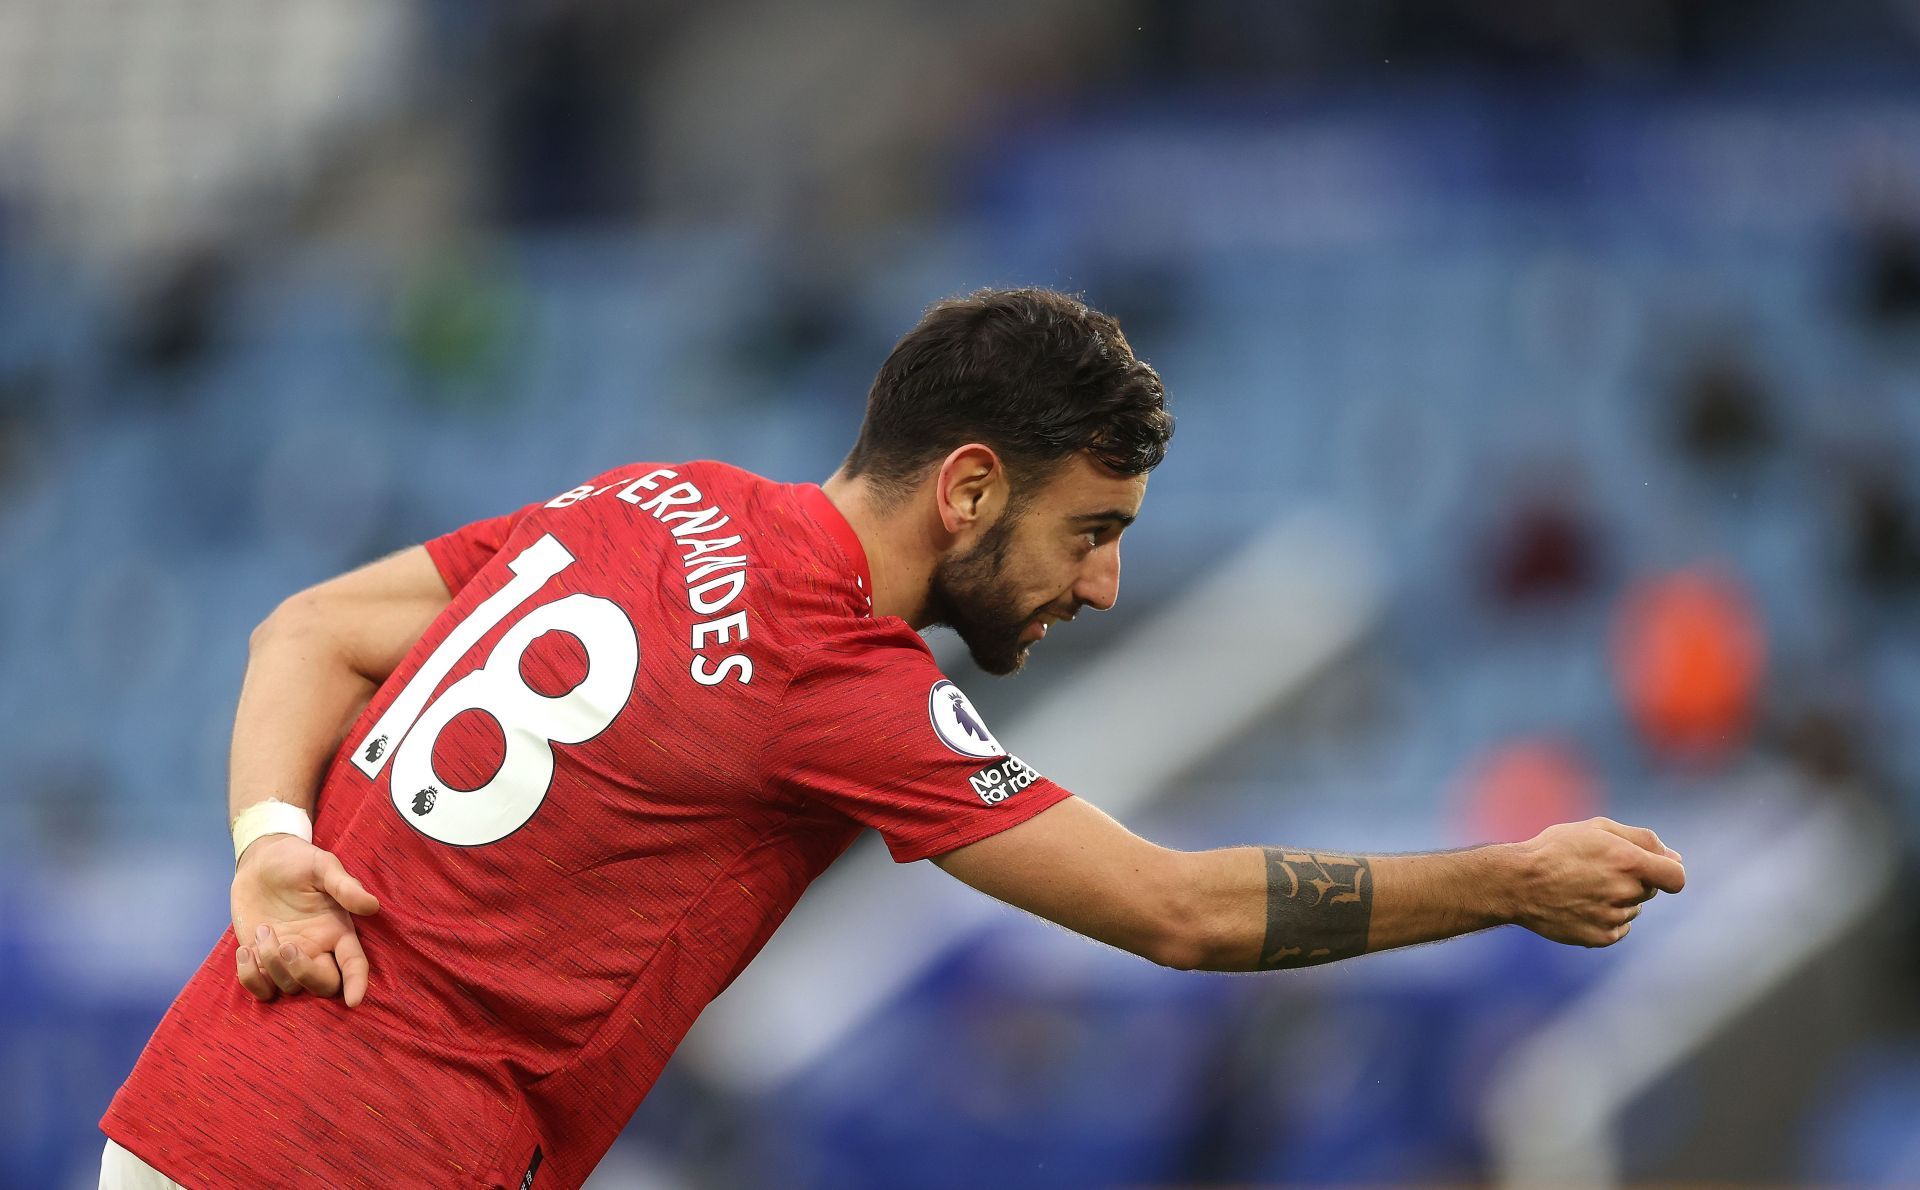 Bruno Fernandes could return to his best now